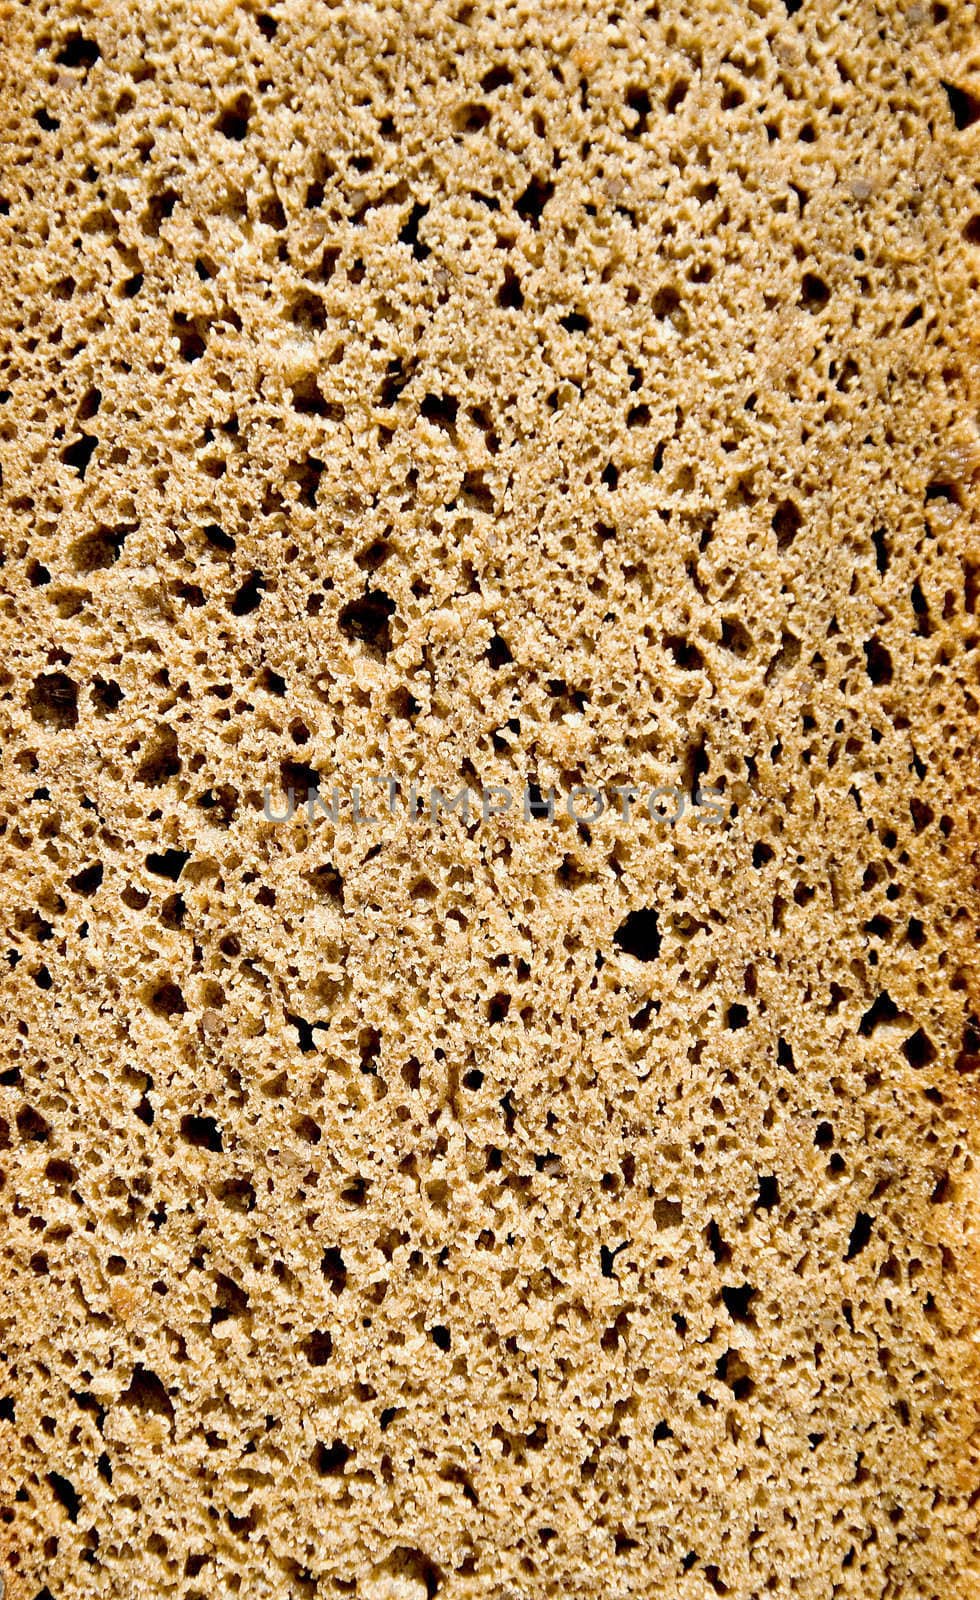 ecological brown bread slice background and texture